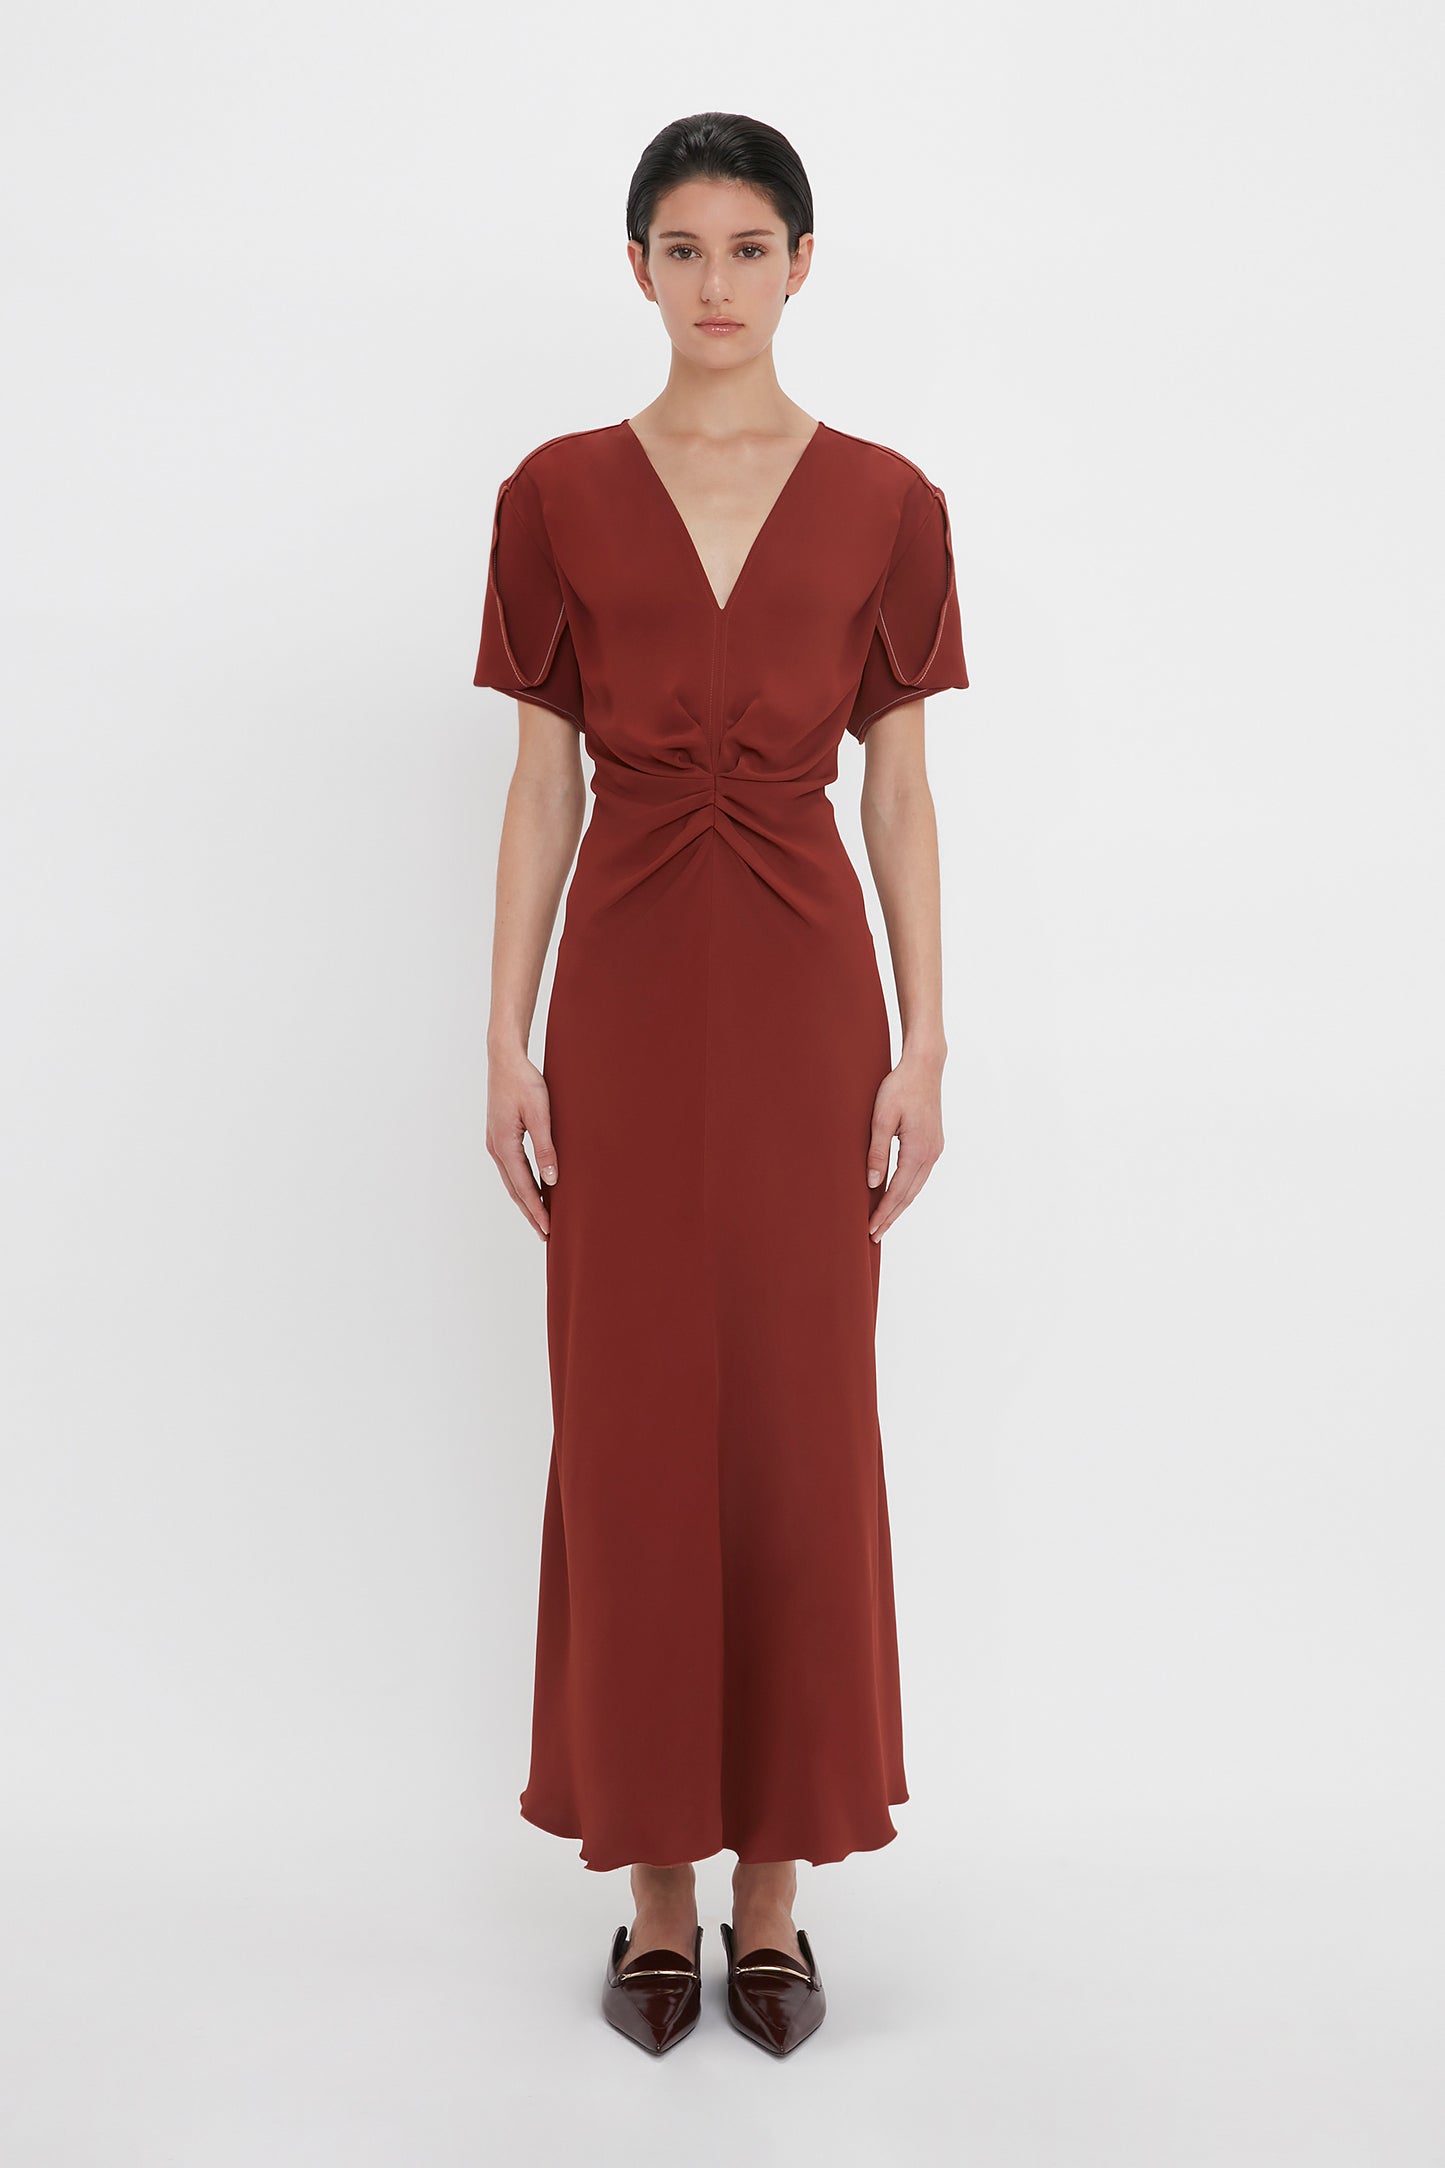 A person stands against a plain white background, wearing the Victoria Beckham Gathered V-Neck Midi Dress In Russet. The figure-flattering stretch fabric accents their shape perfectly. They complete the look with brown pointed shoes and short, dark hair.